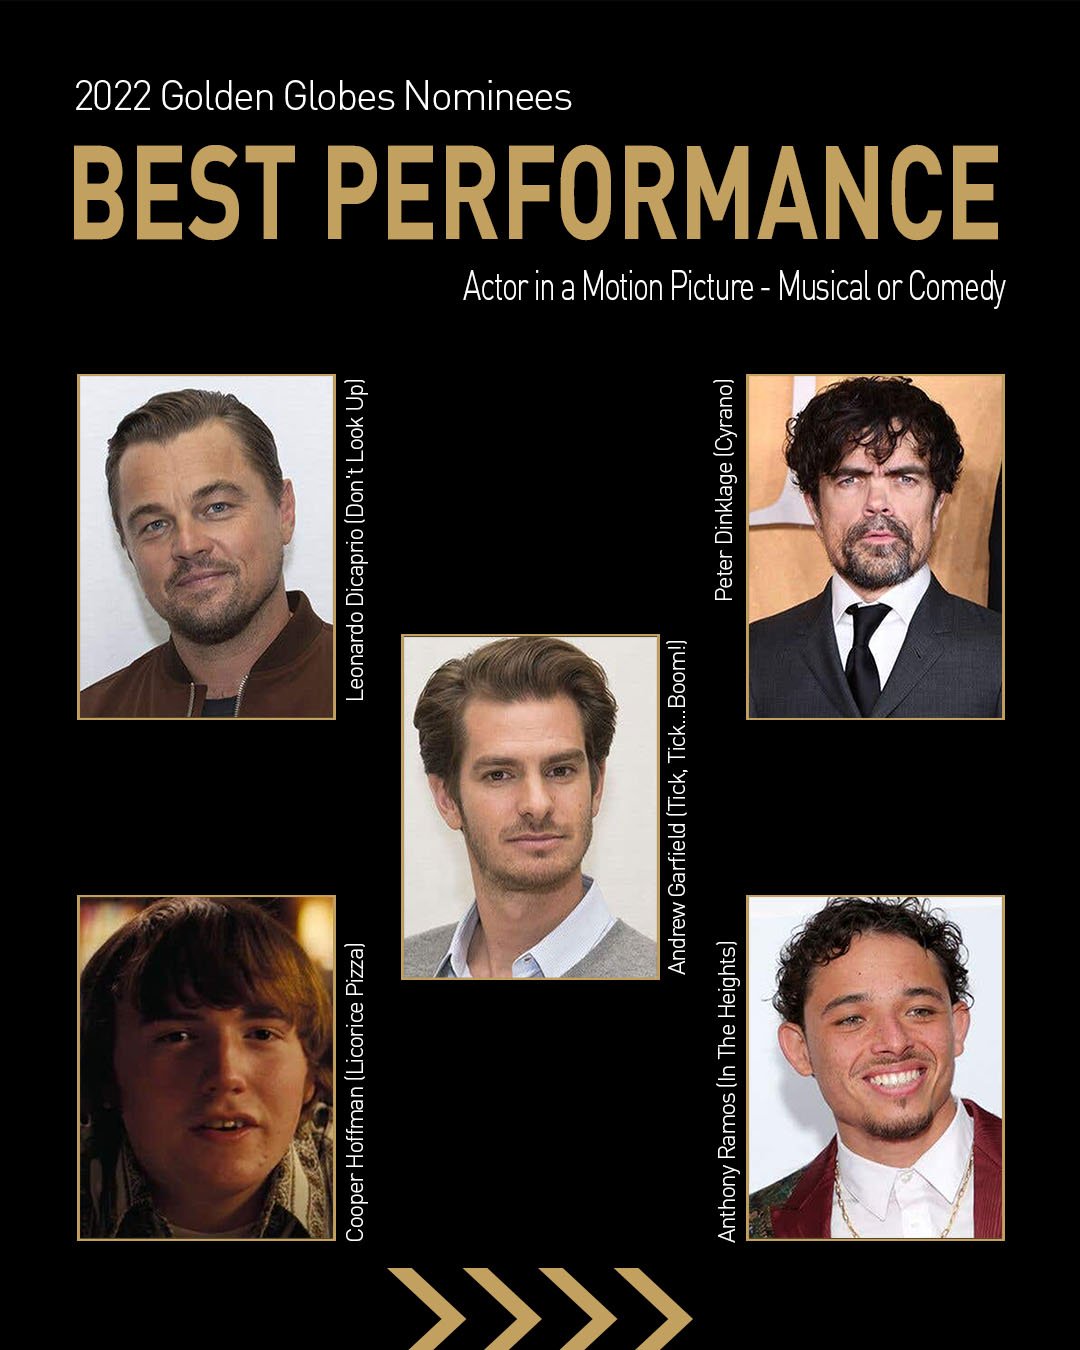 Nominations-IG Posts2E - Best Performance Actor Motion Picture - Musical or Comedy.jpg